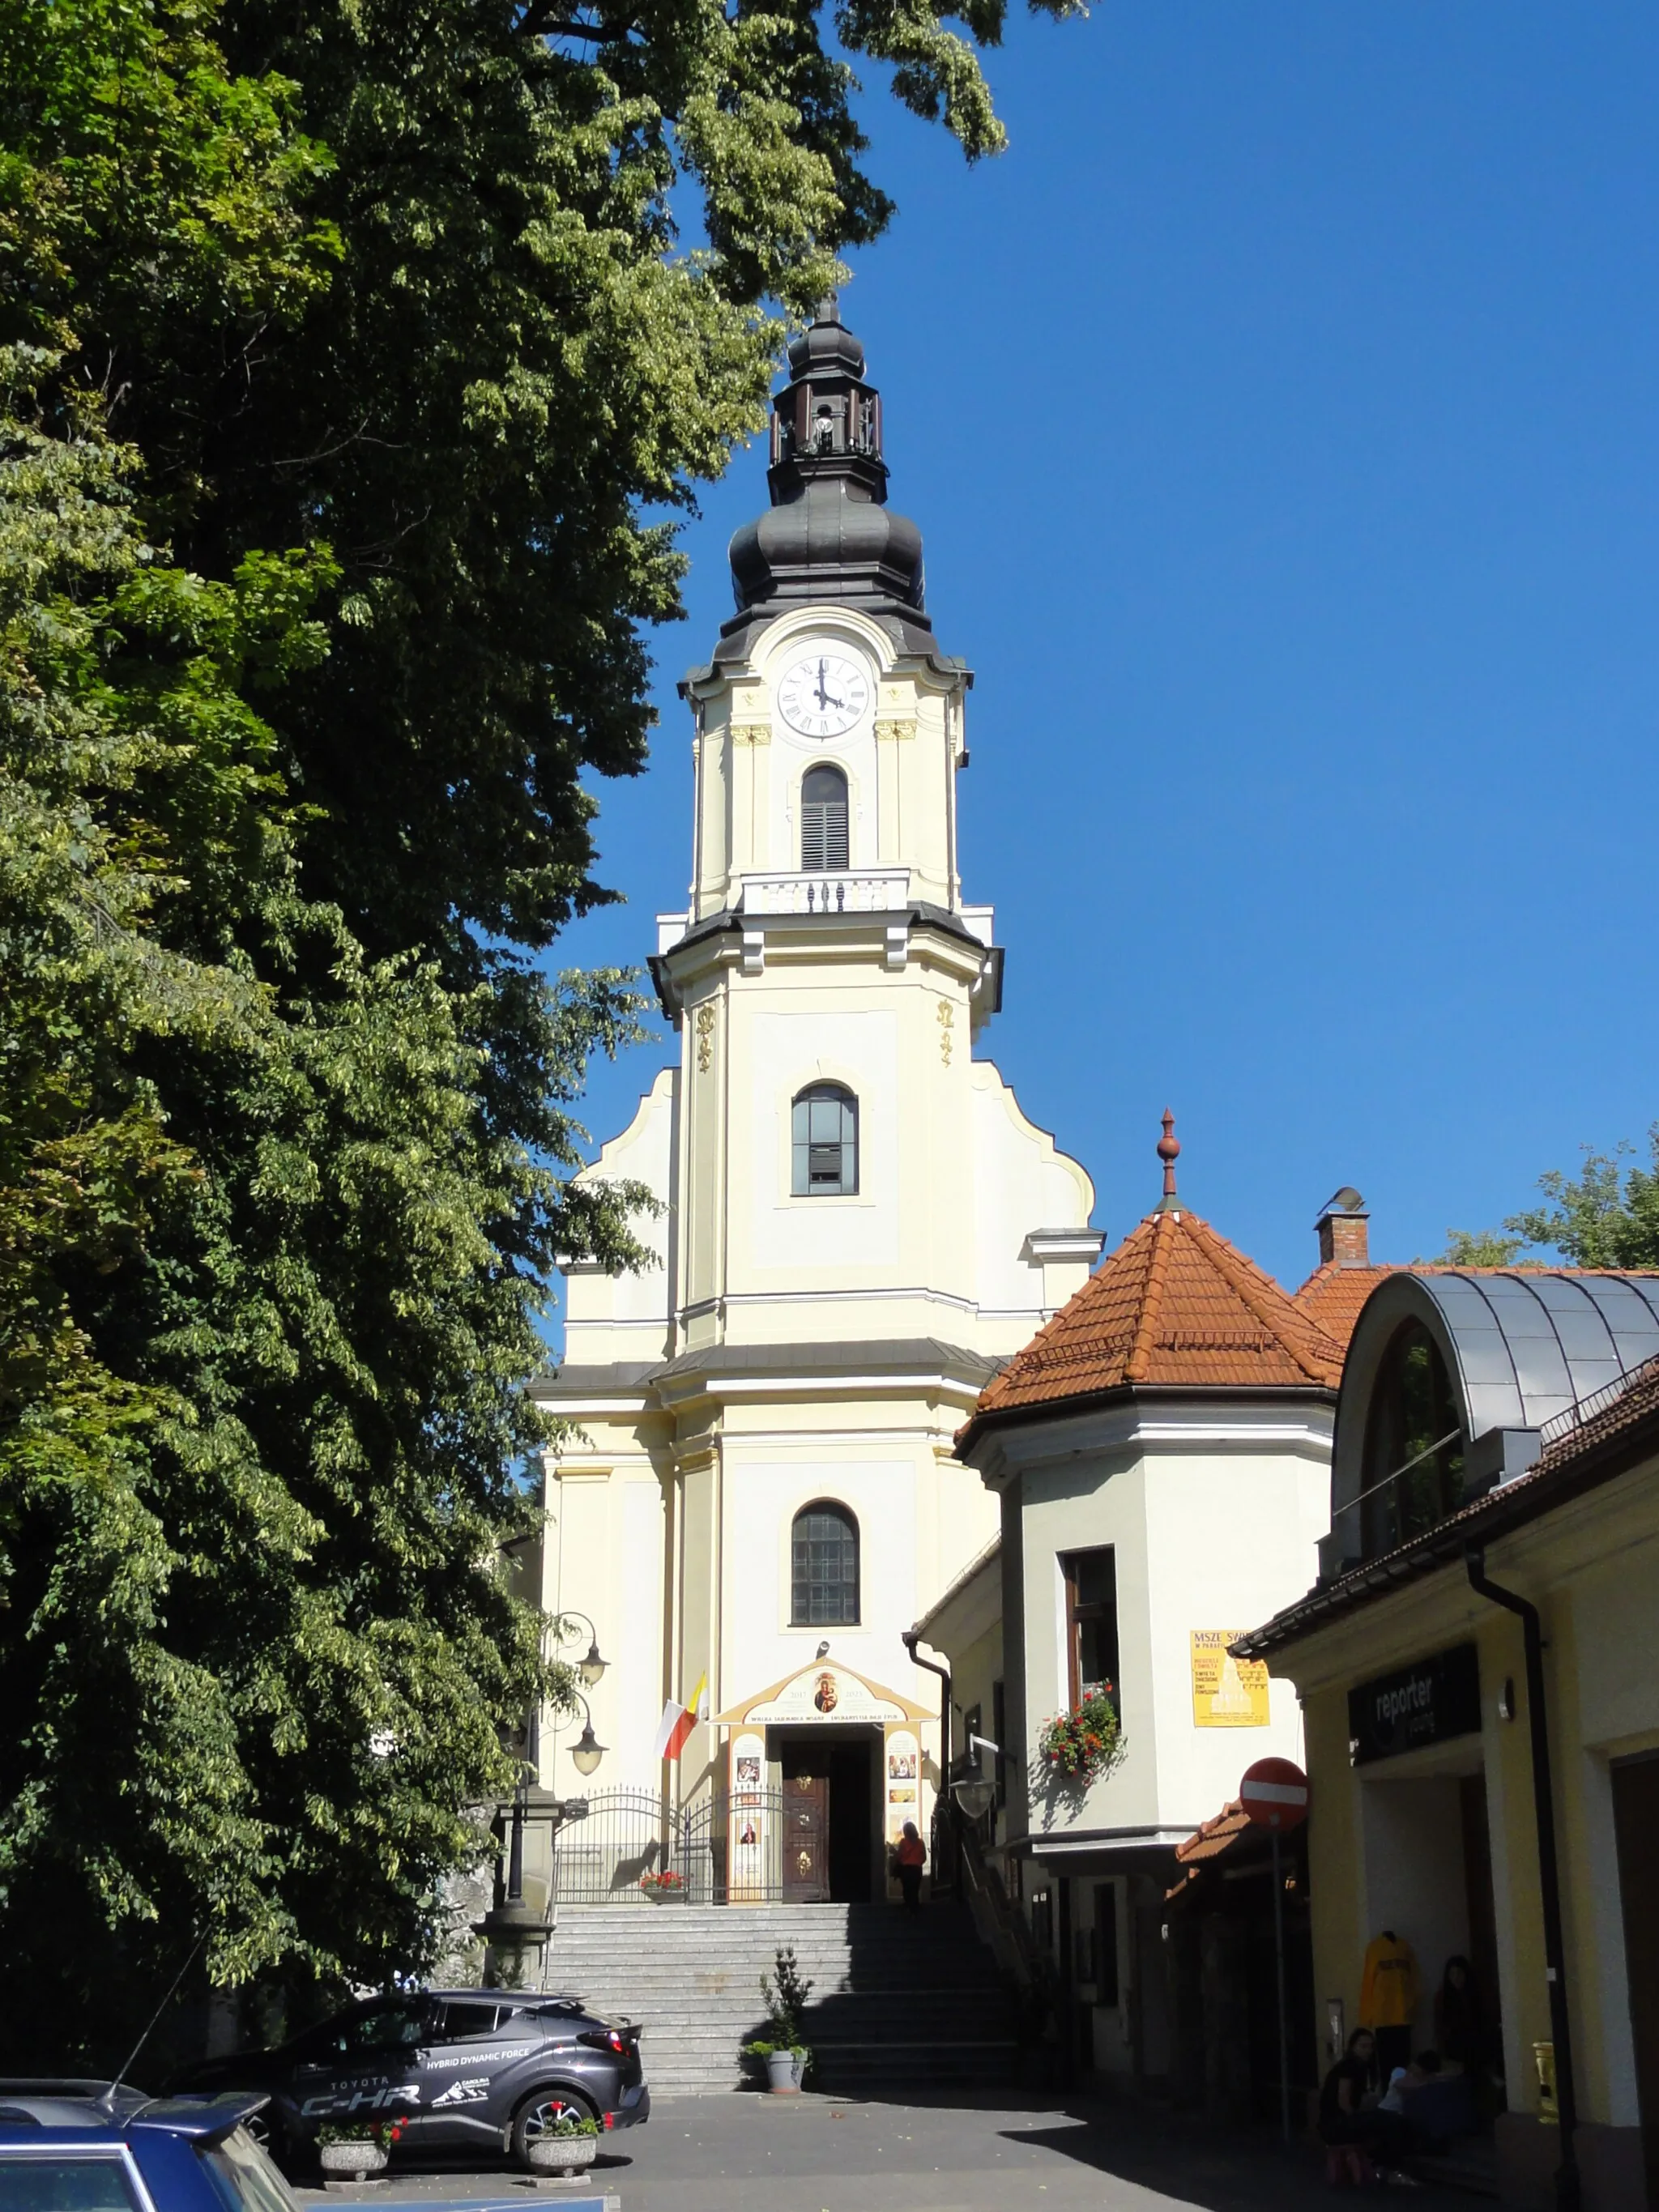 Image of Andrychów